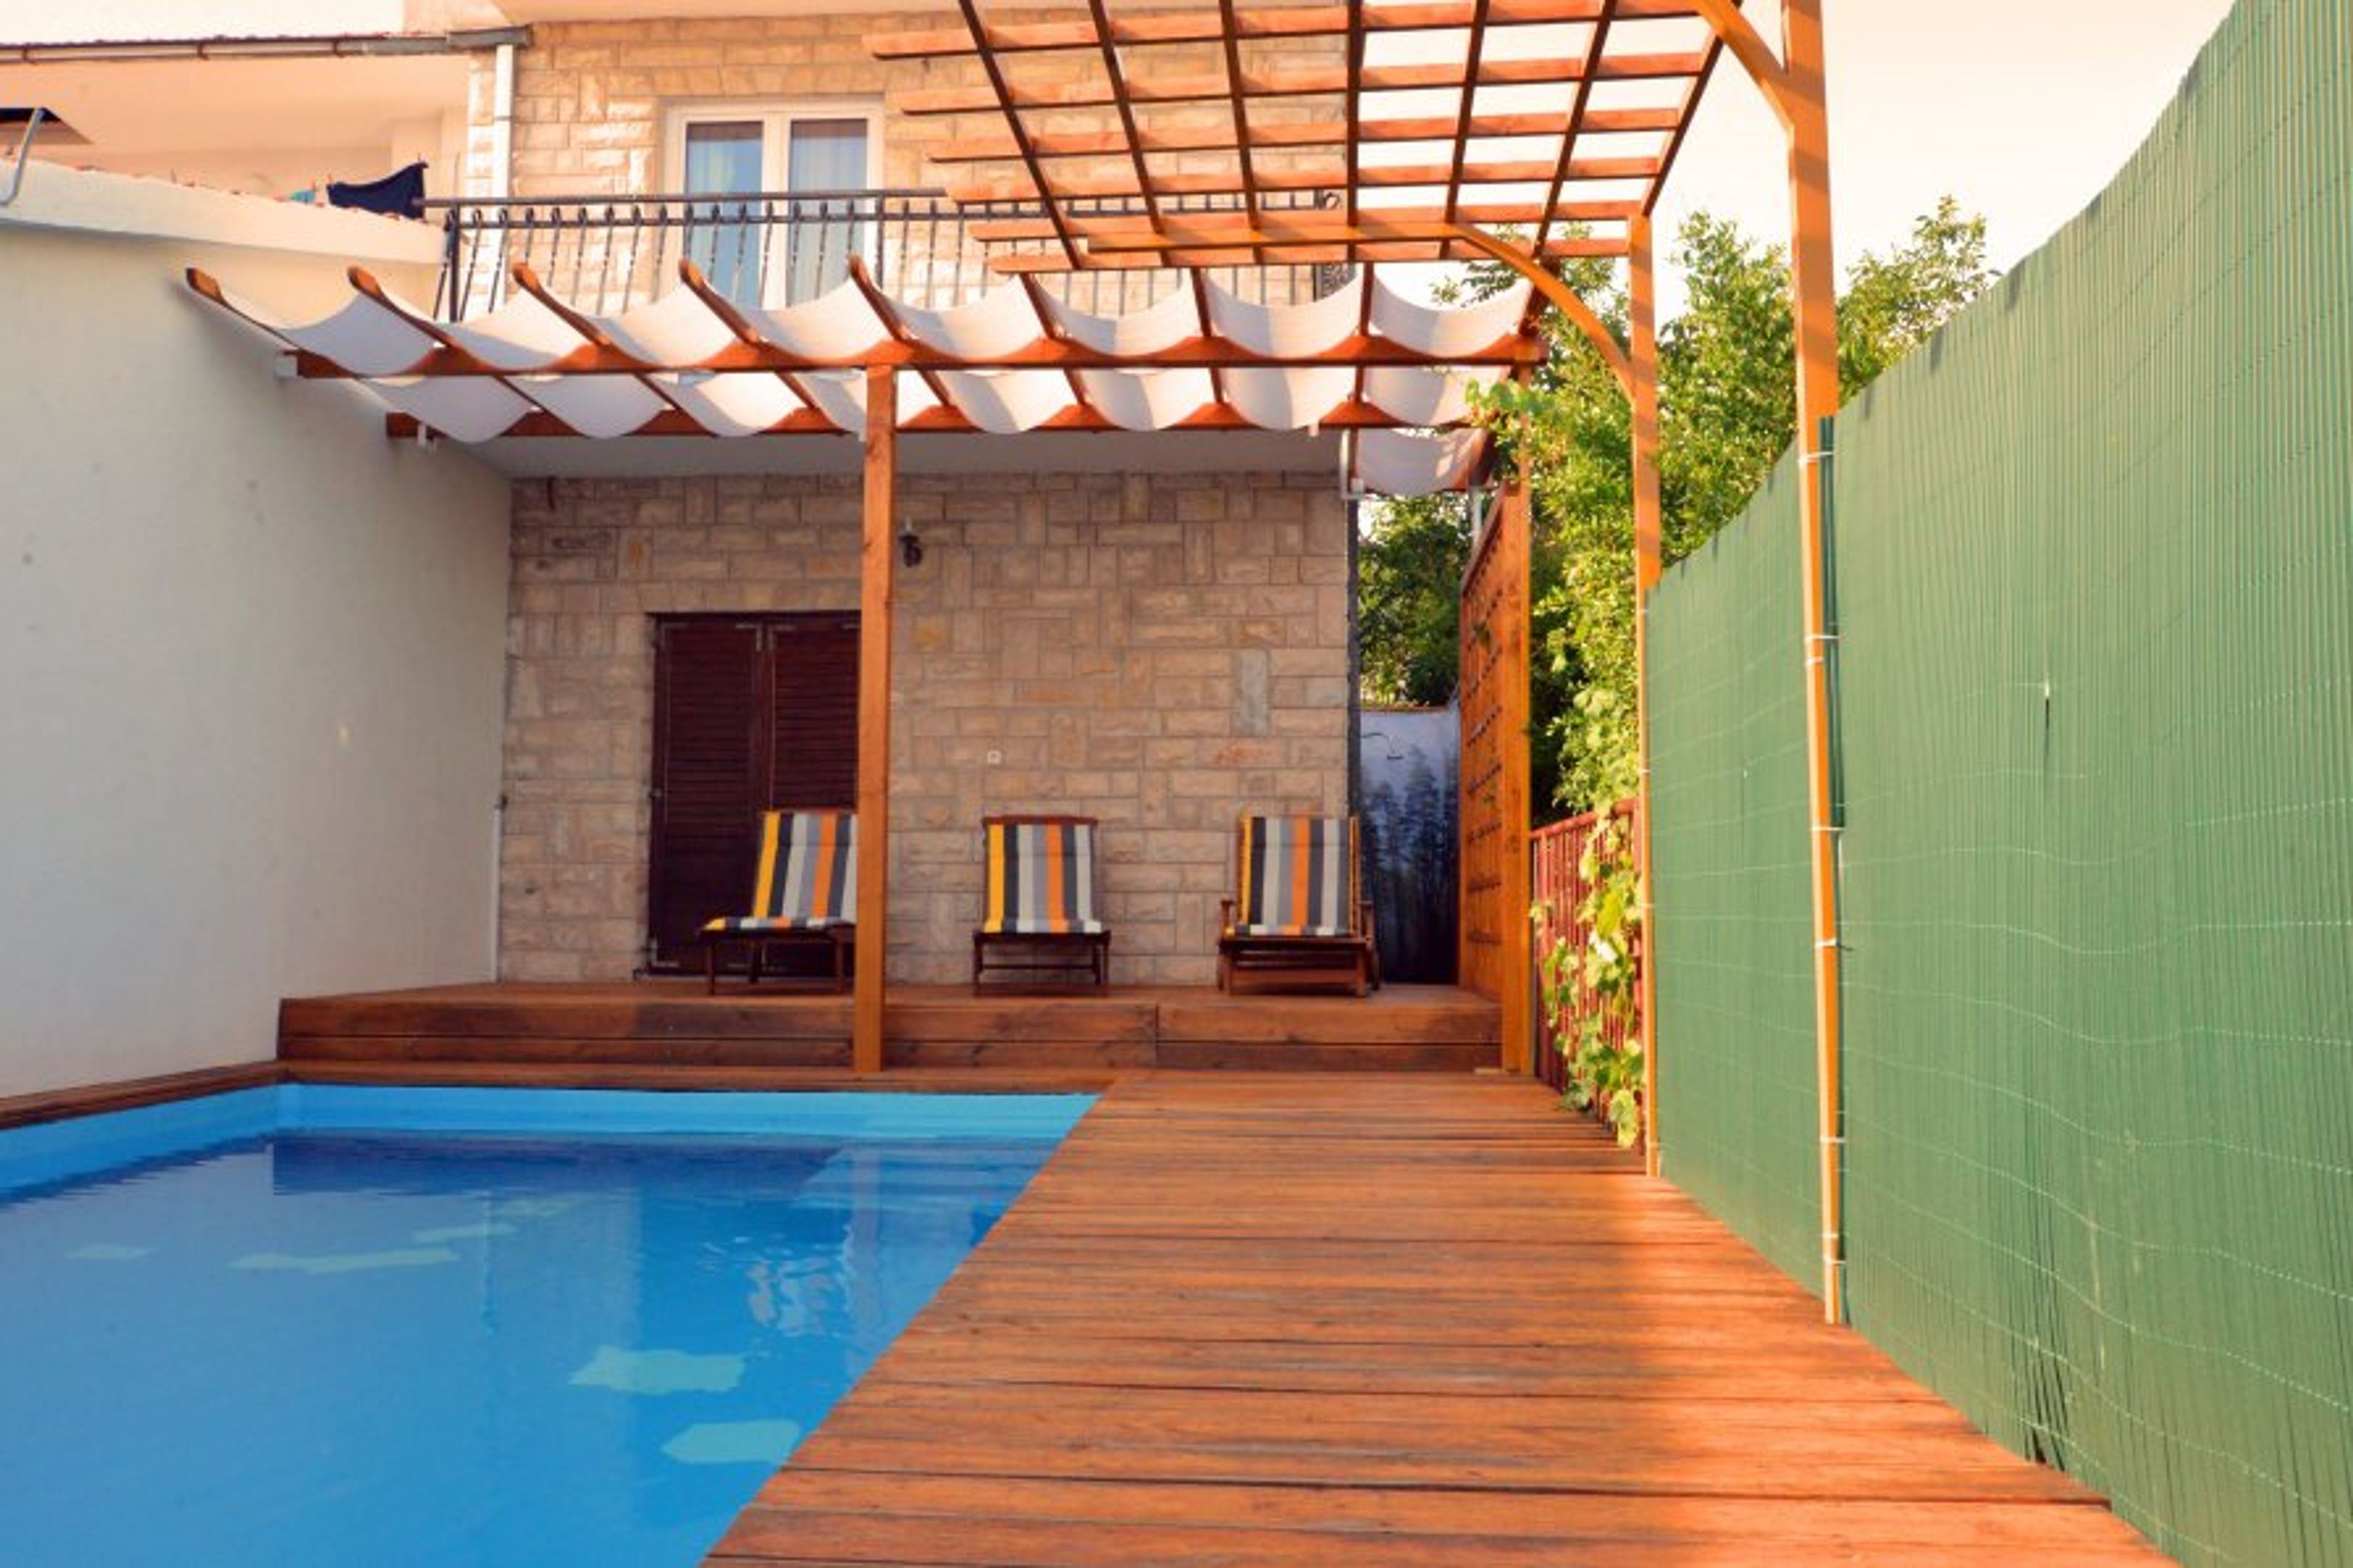 Private outdoor swimming pool